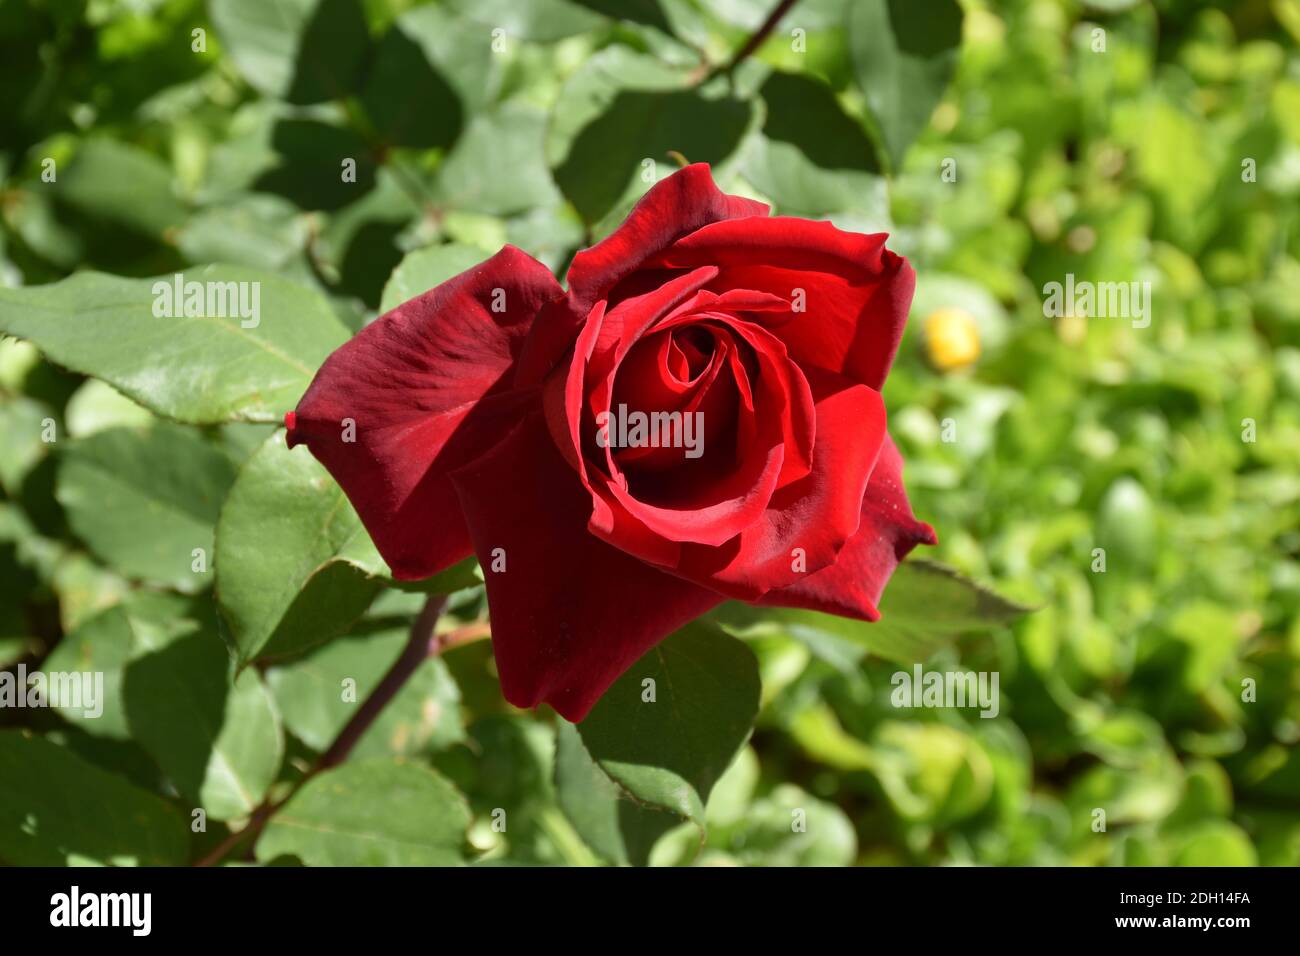 Sunlit Chrysler Imperial Rose with a delicate dark red color and strong fragrance. Top view with marigold plants below. Symbol of love. Stock Photo